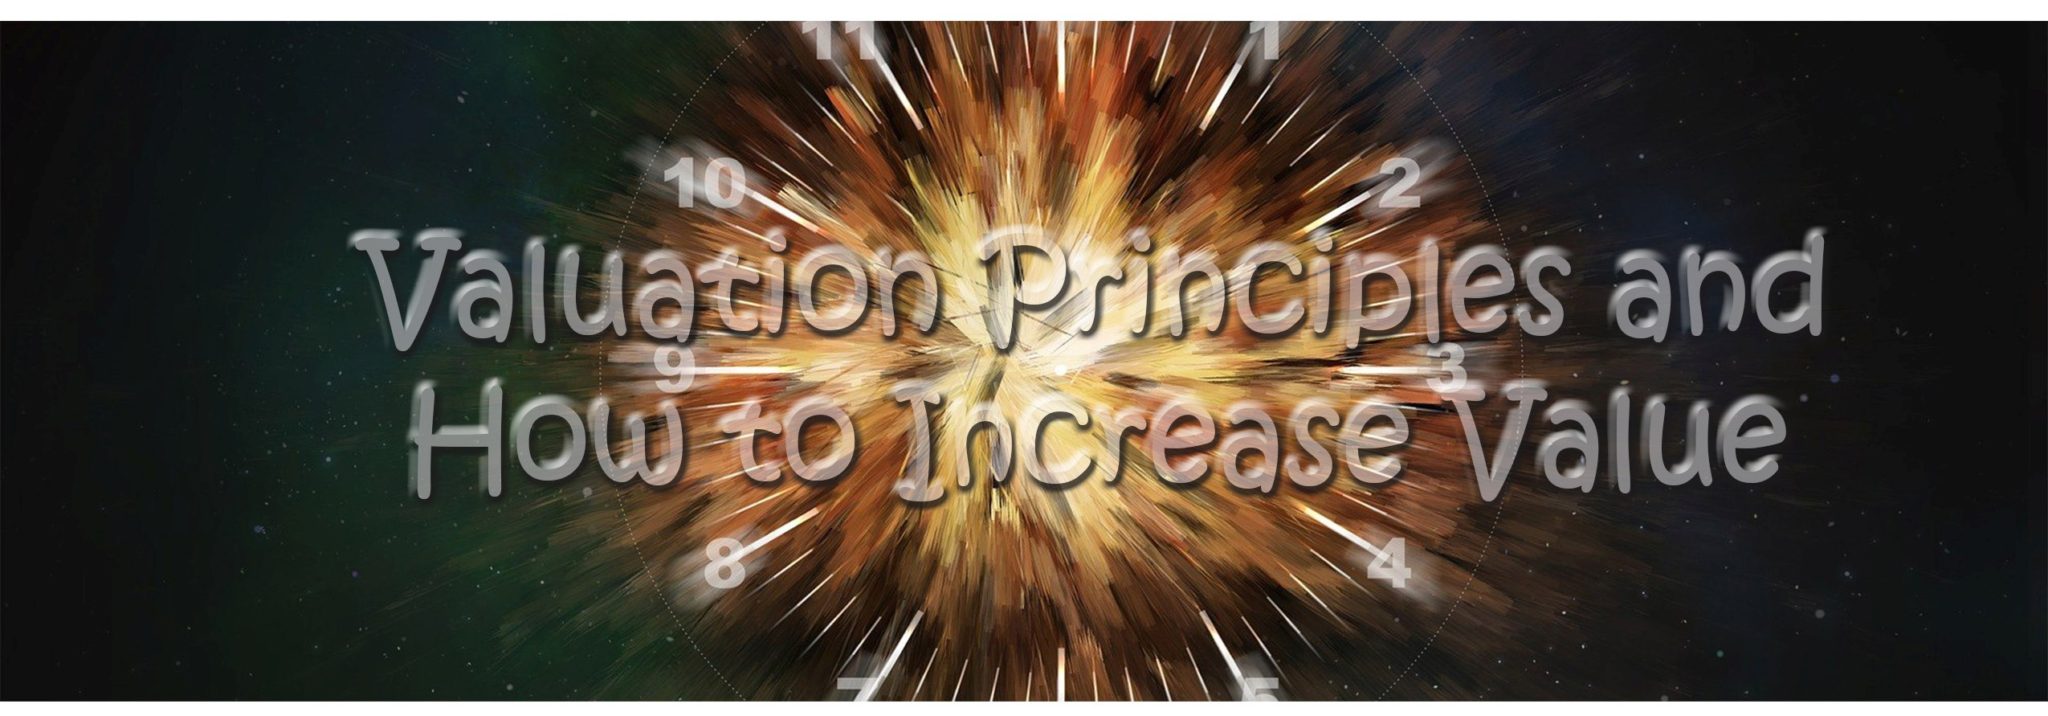 Valuation Principles and How to Increase Value